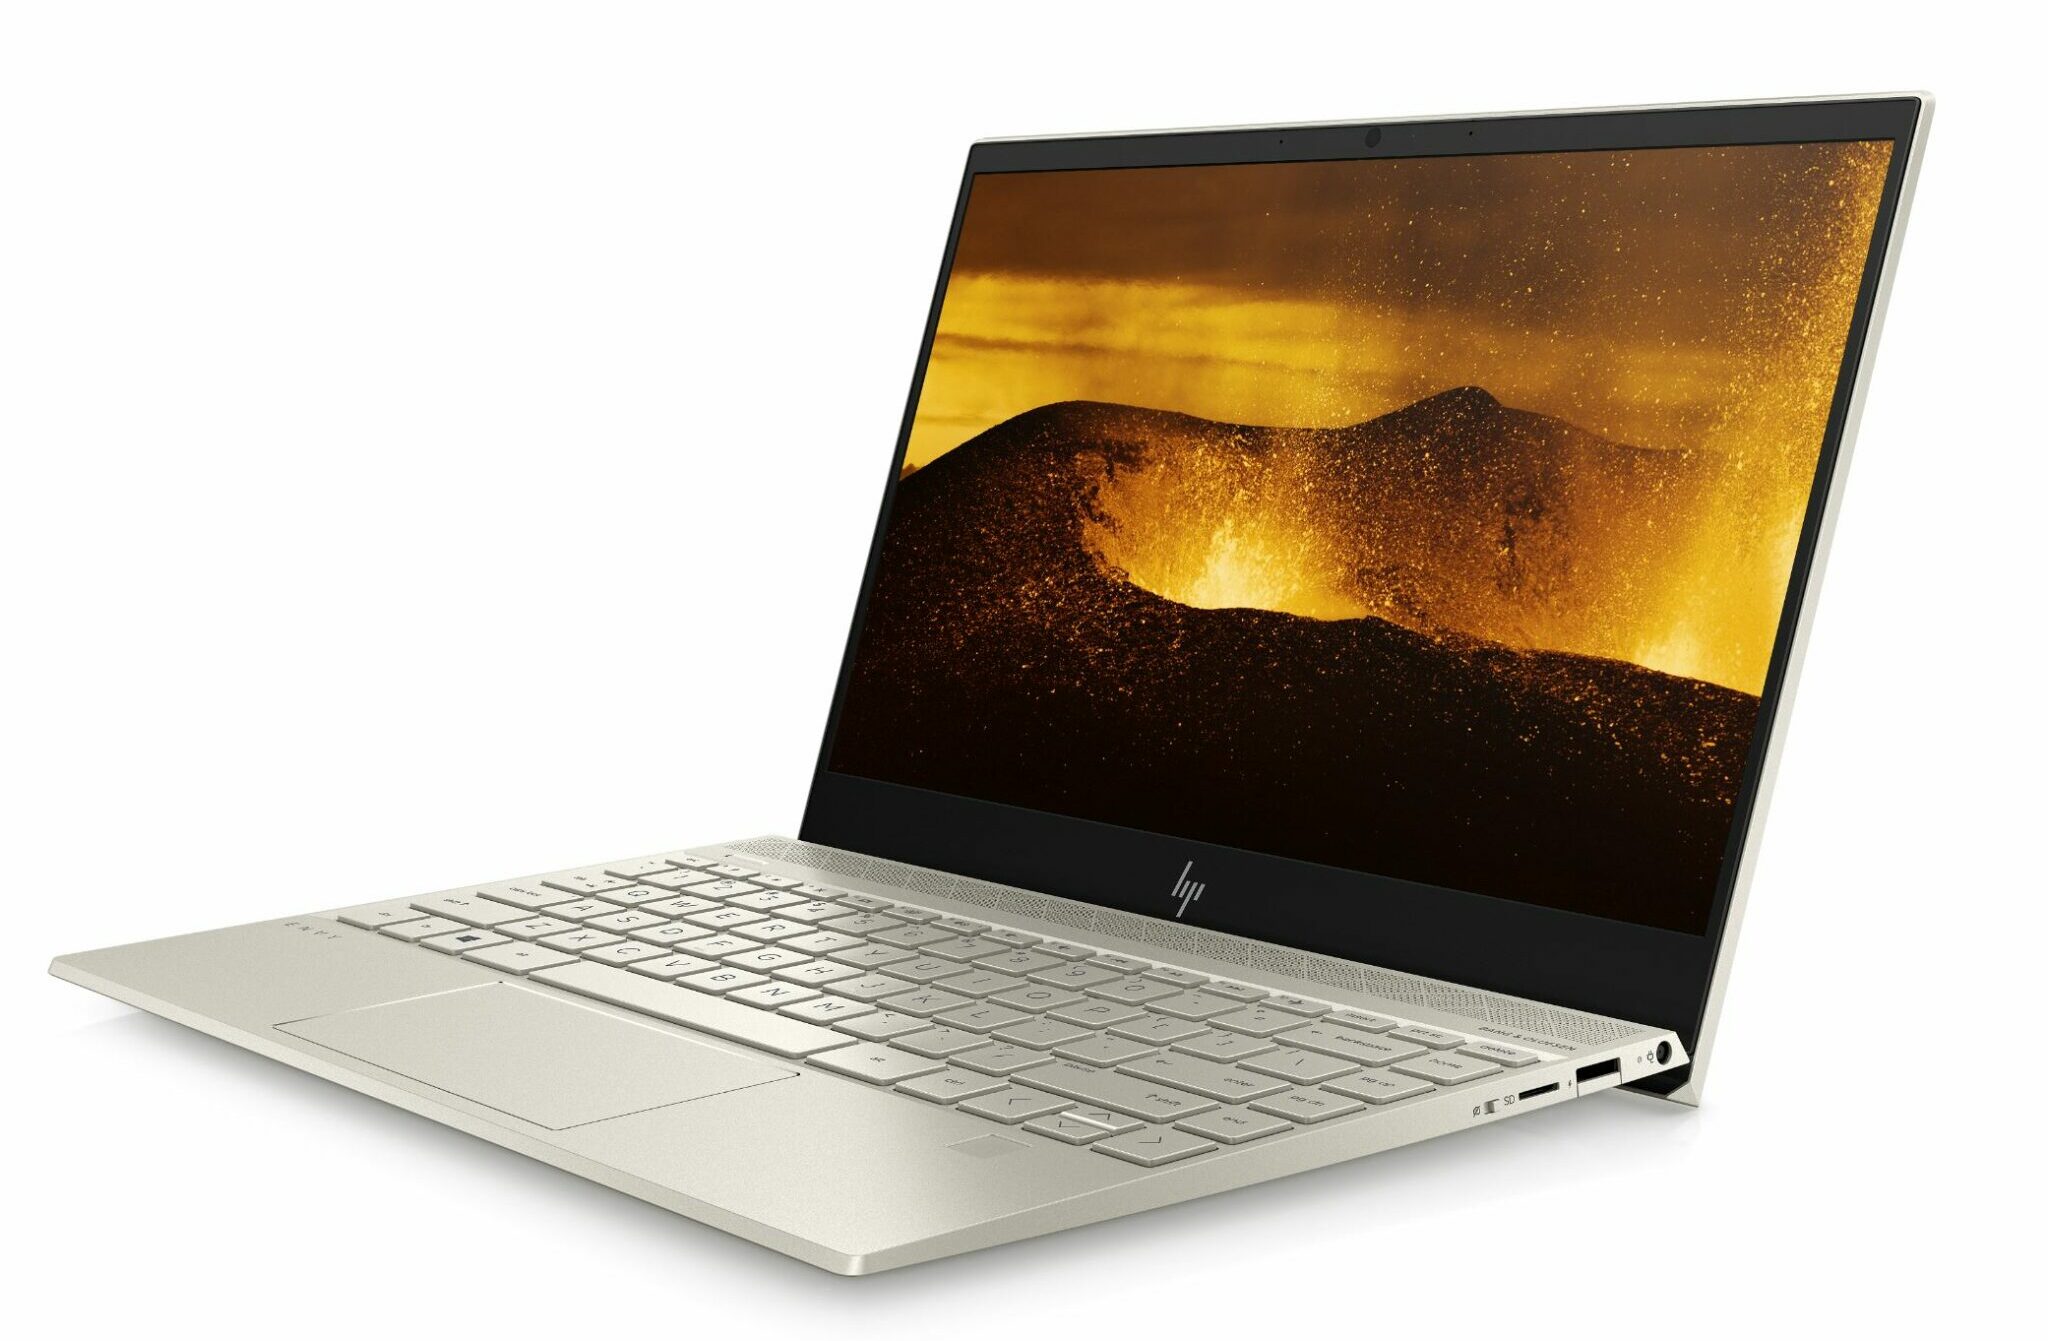 HP Envy 13 and Envy x360 - Elegantly stunning design meets exceptional performance 2